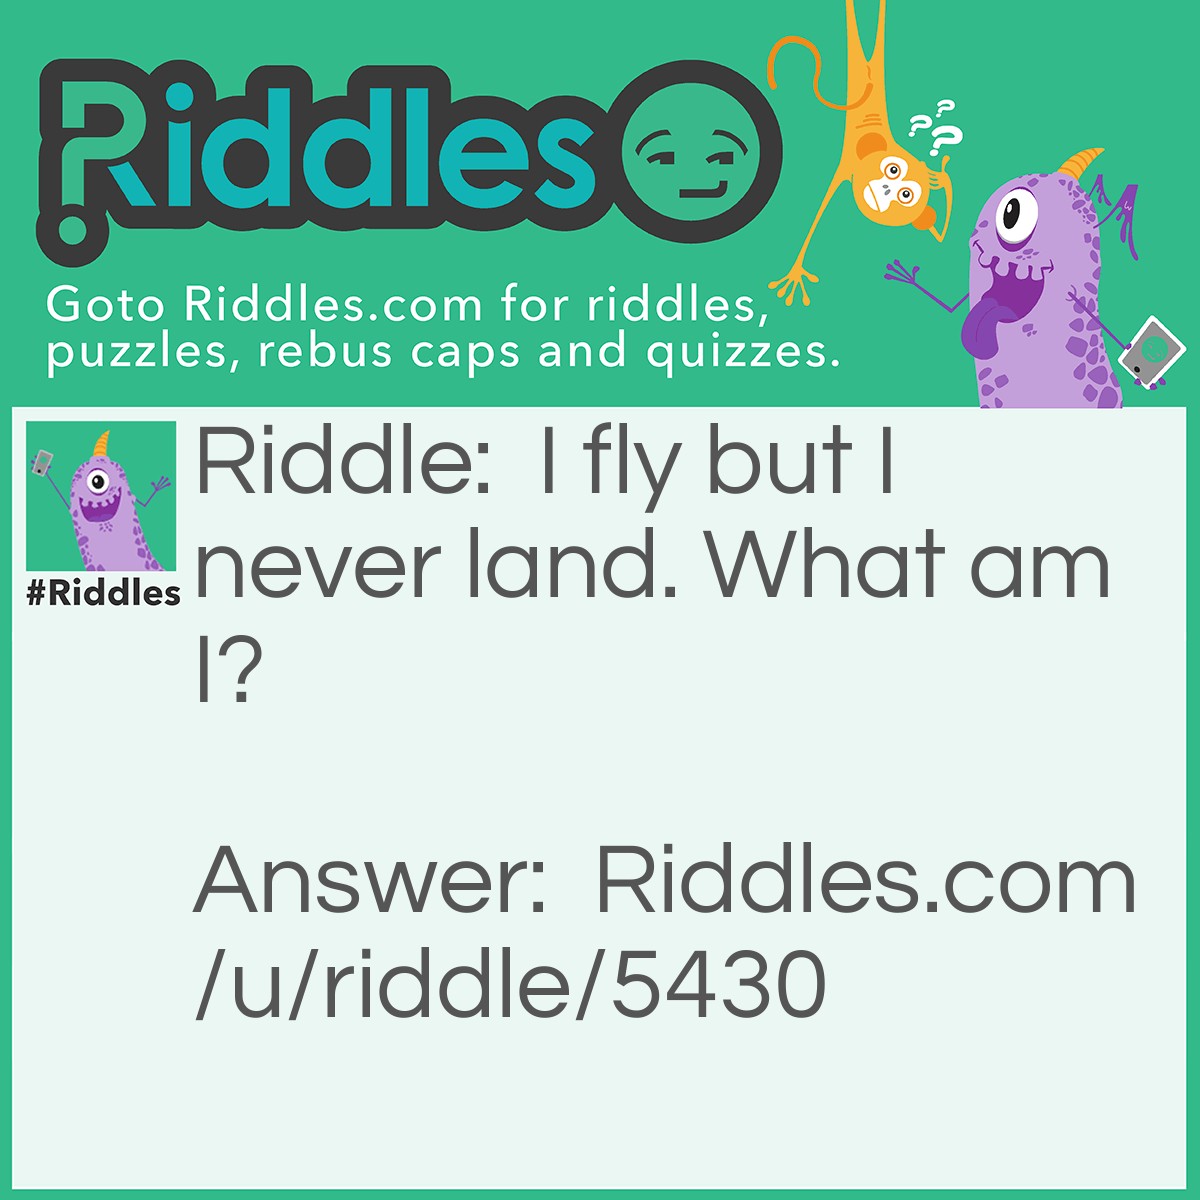 Riddle: I fly but I never land. What am I? Answer: Time.